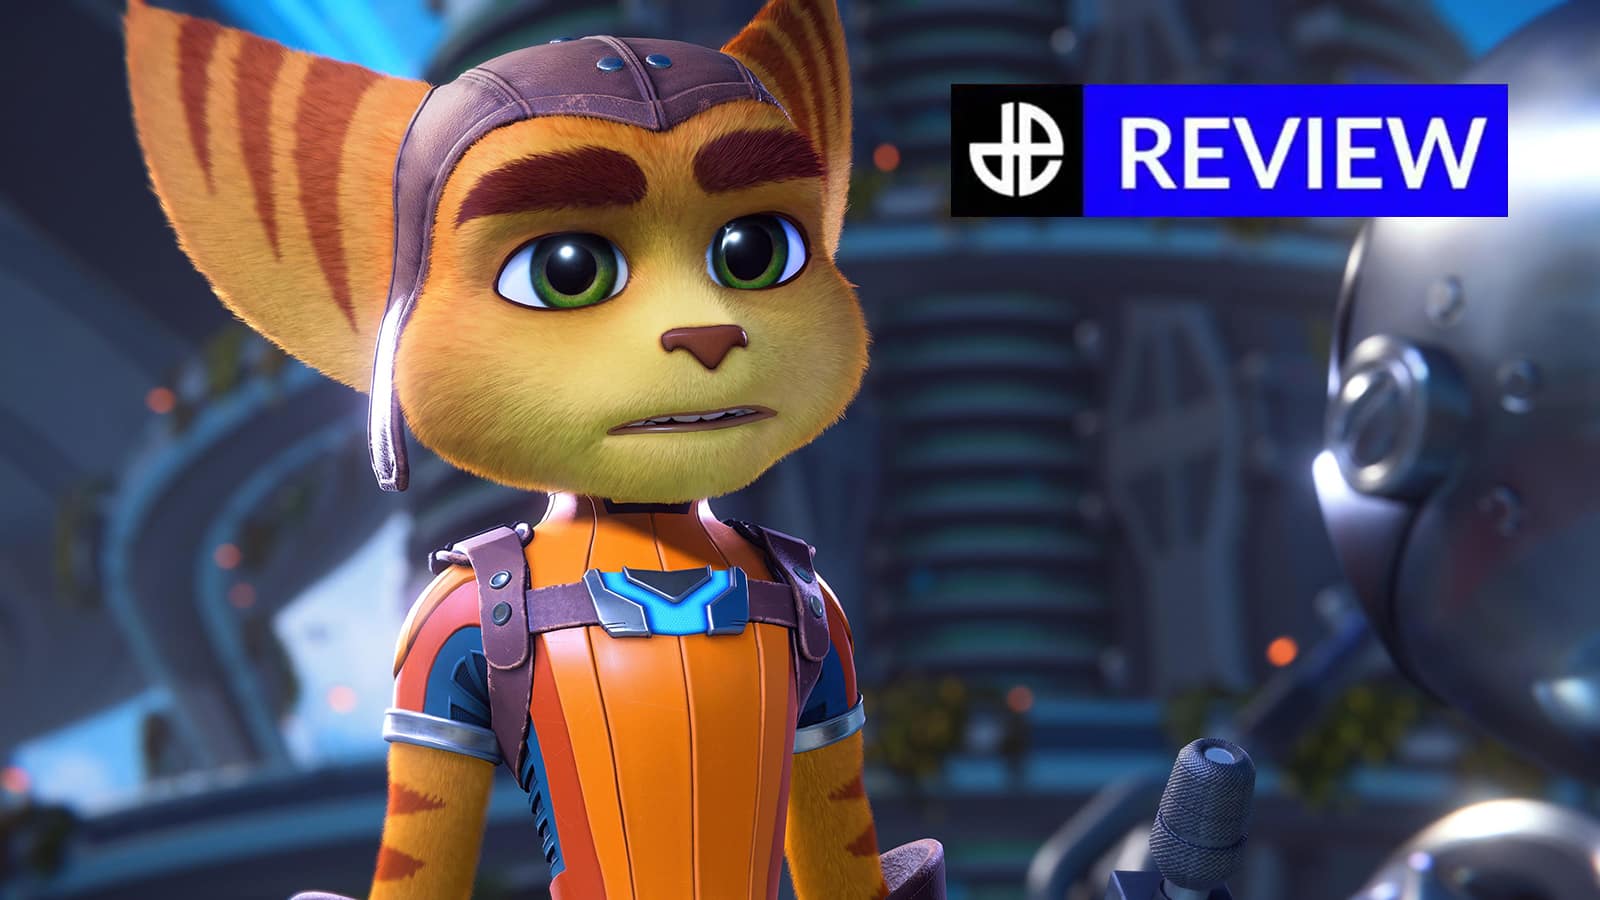 Ratchet & Clank Heads to PlayStation 5 With Female Ratchet